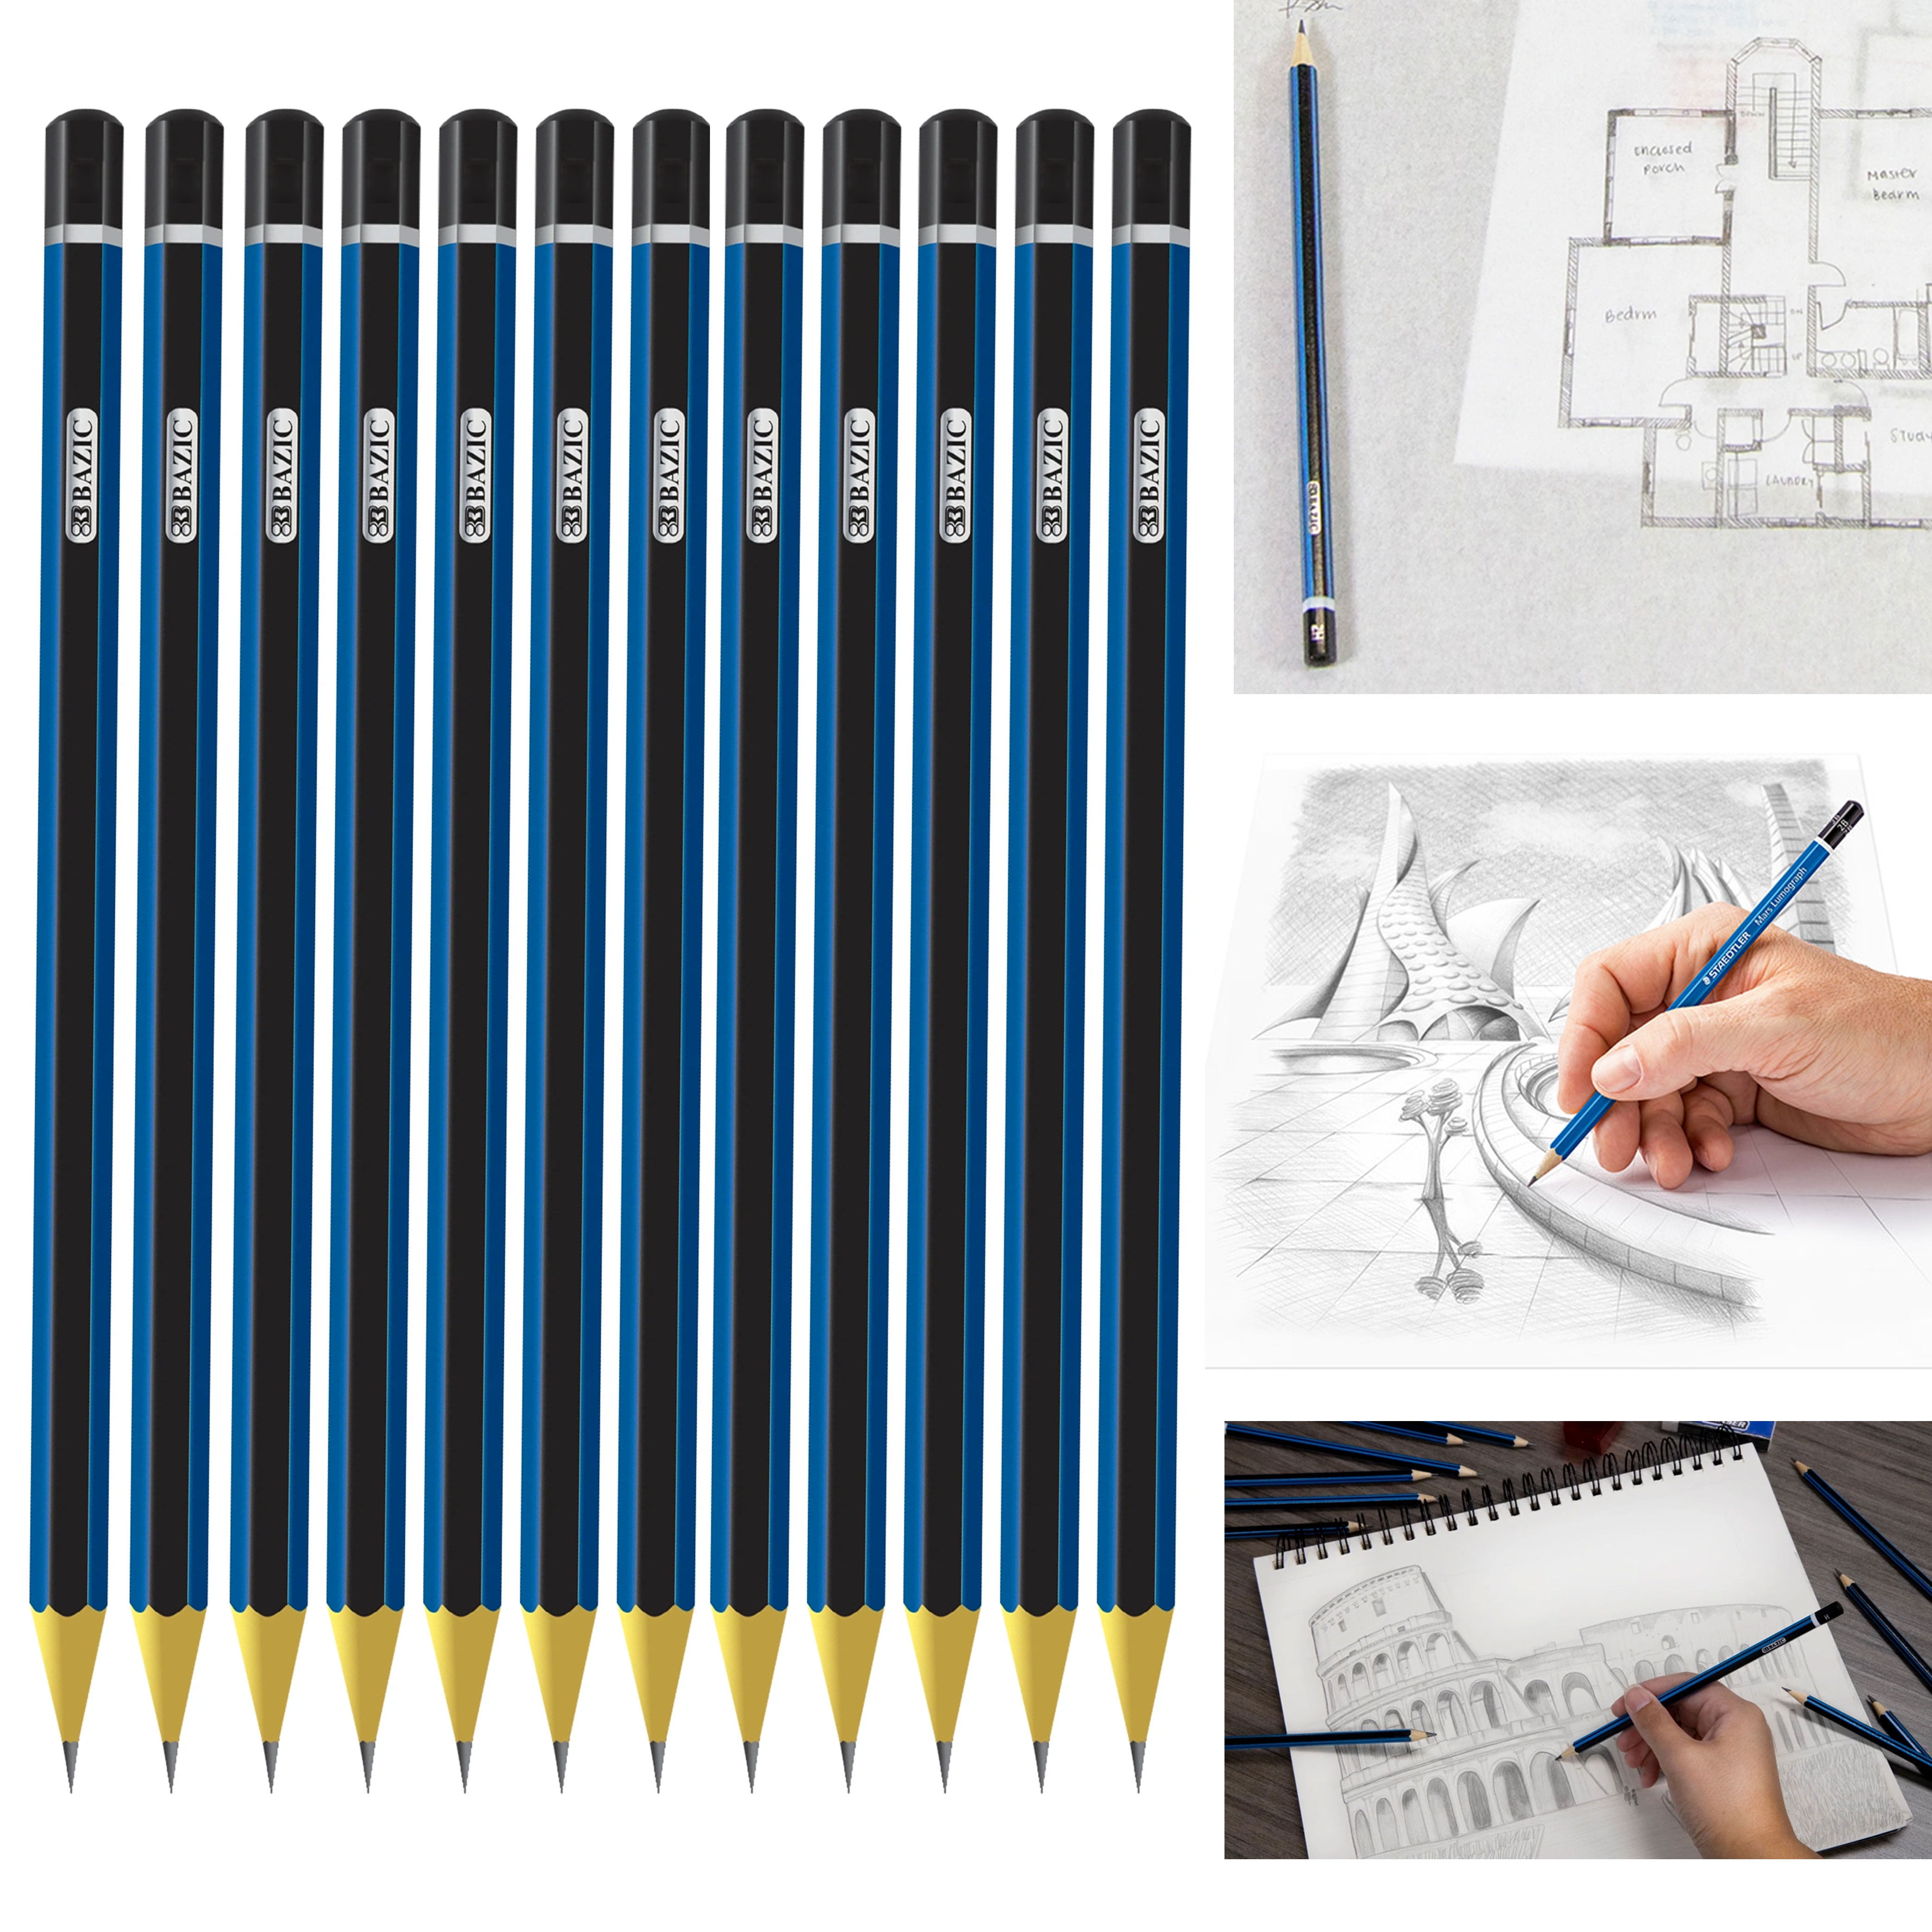 Karst® 5-pack 2B woodless graphite pencils from 13.2392€